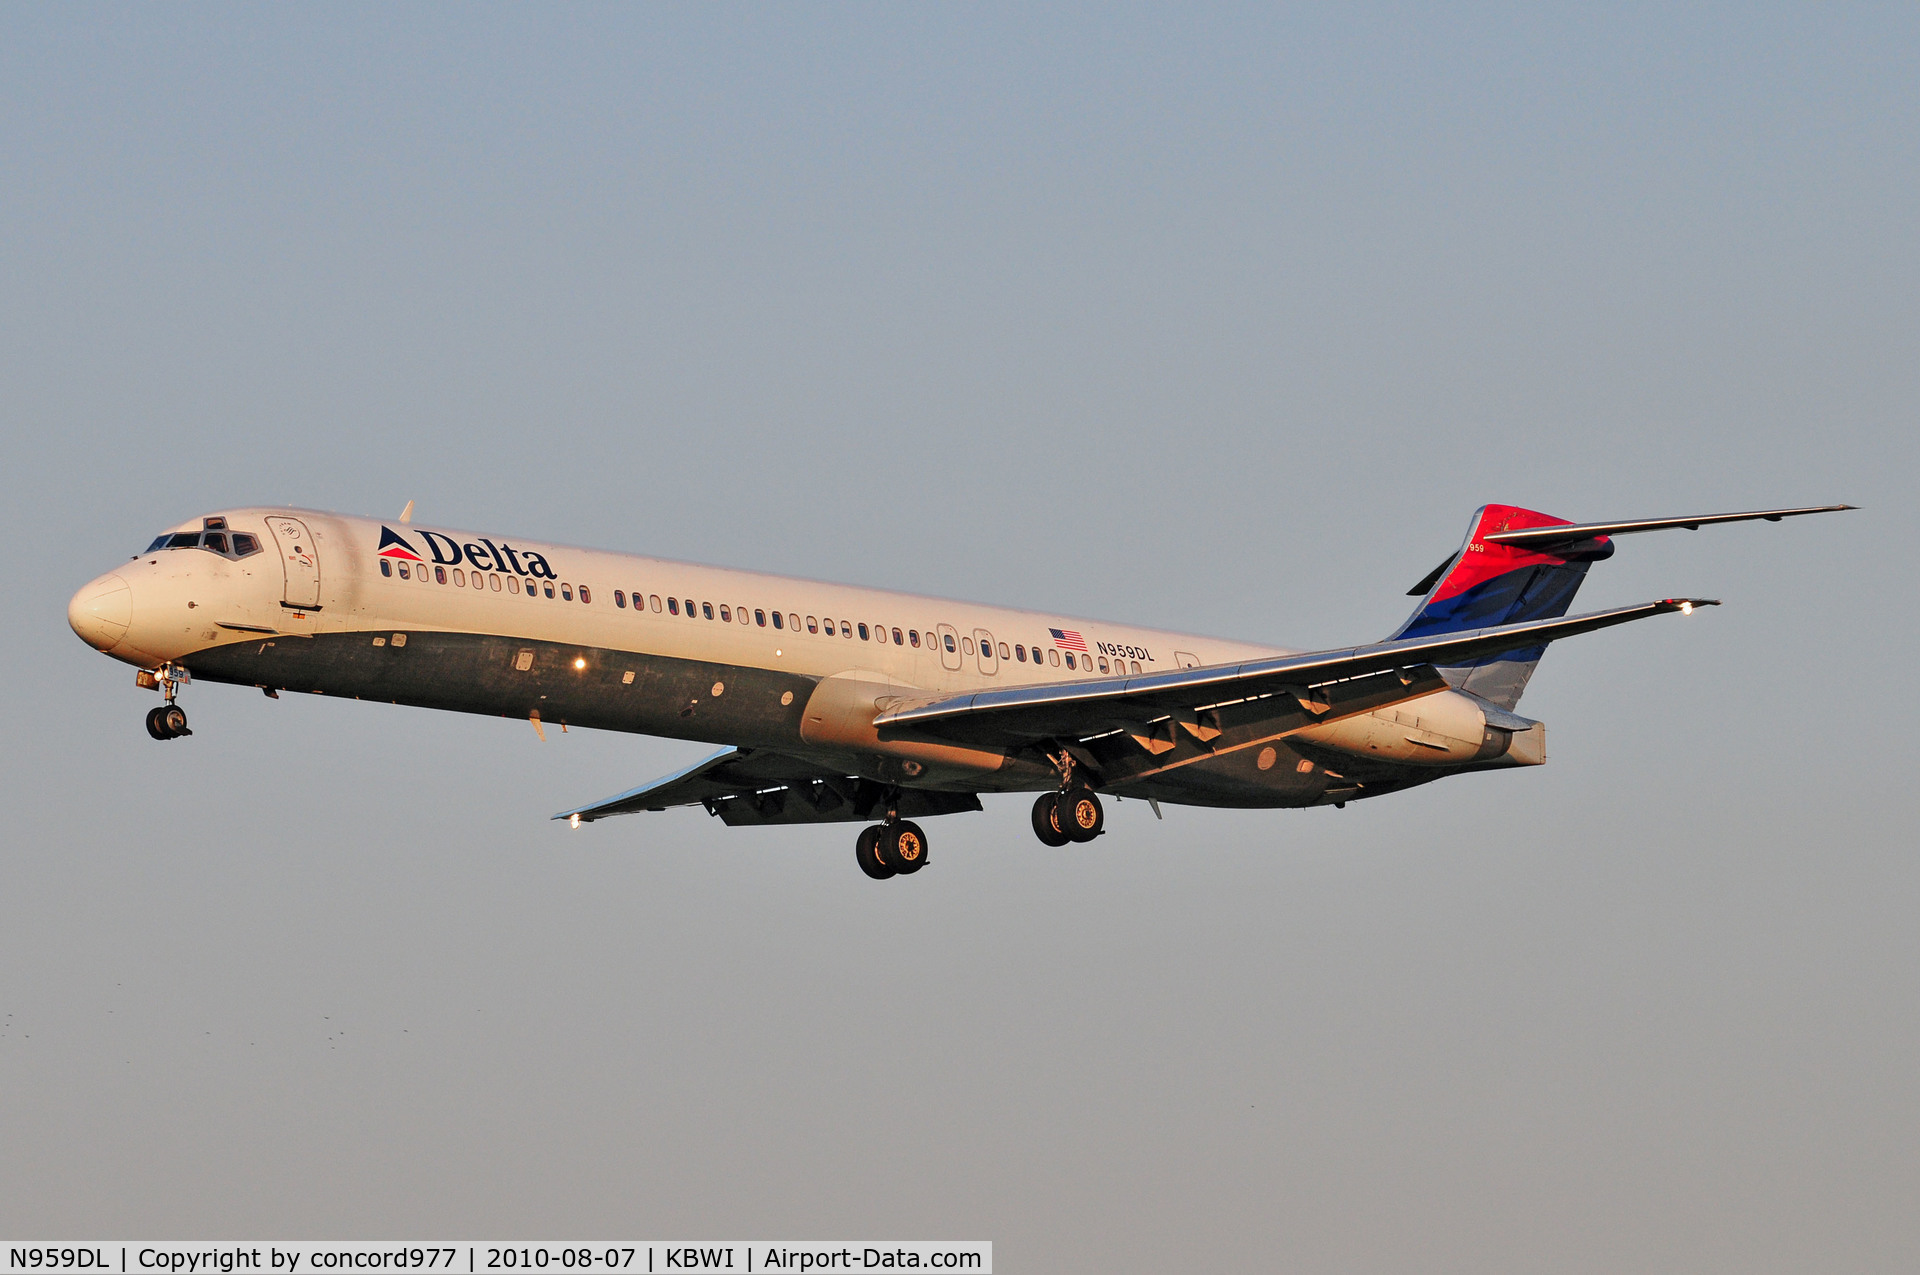 N959DL, 1990 McDonnell Douglas MD-88 C/N 49978, Seen at KBWI on 8/7/2010